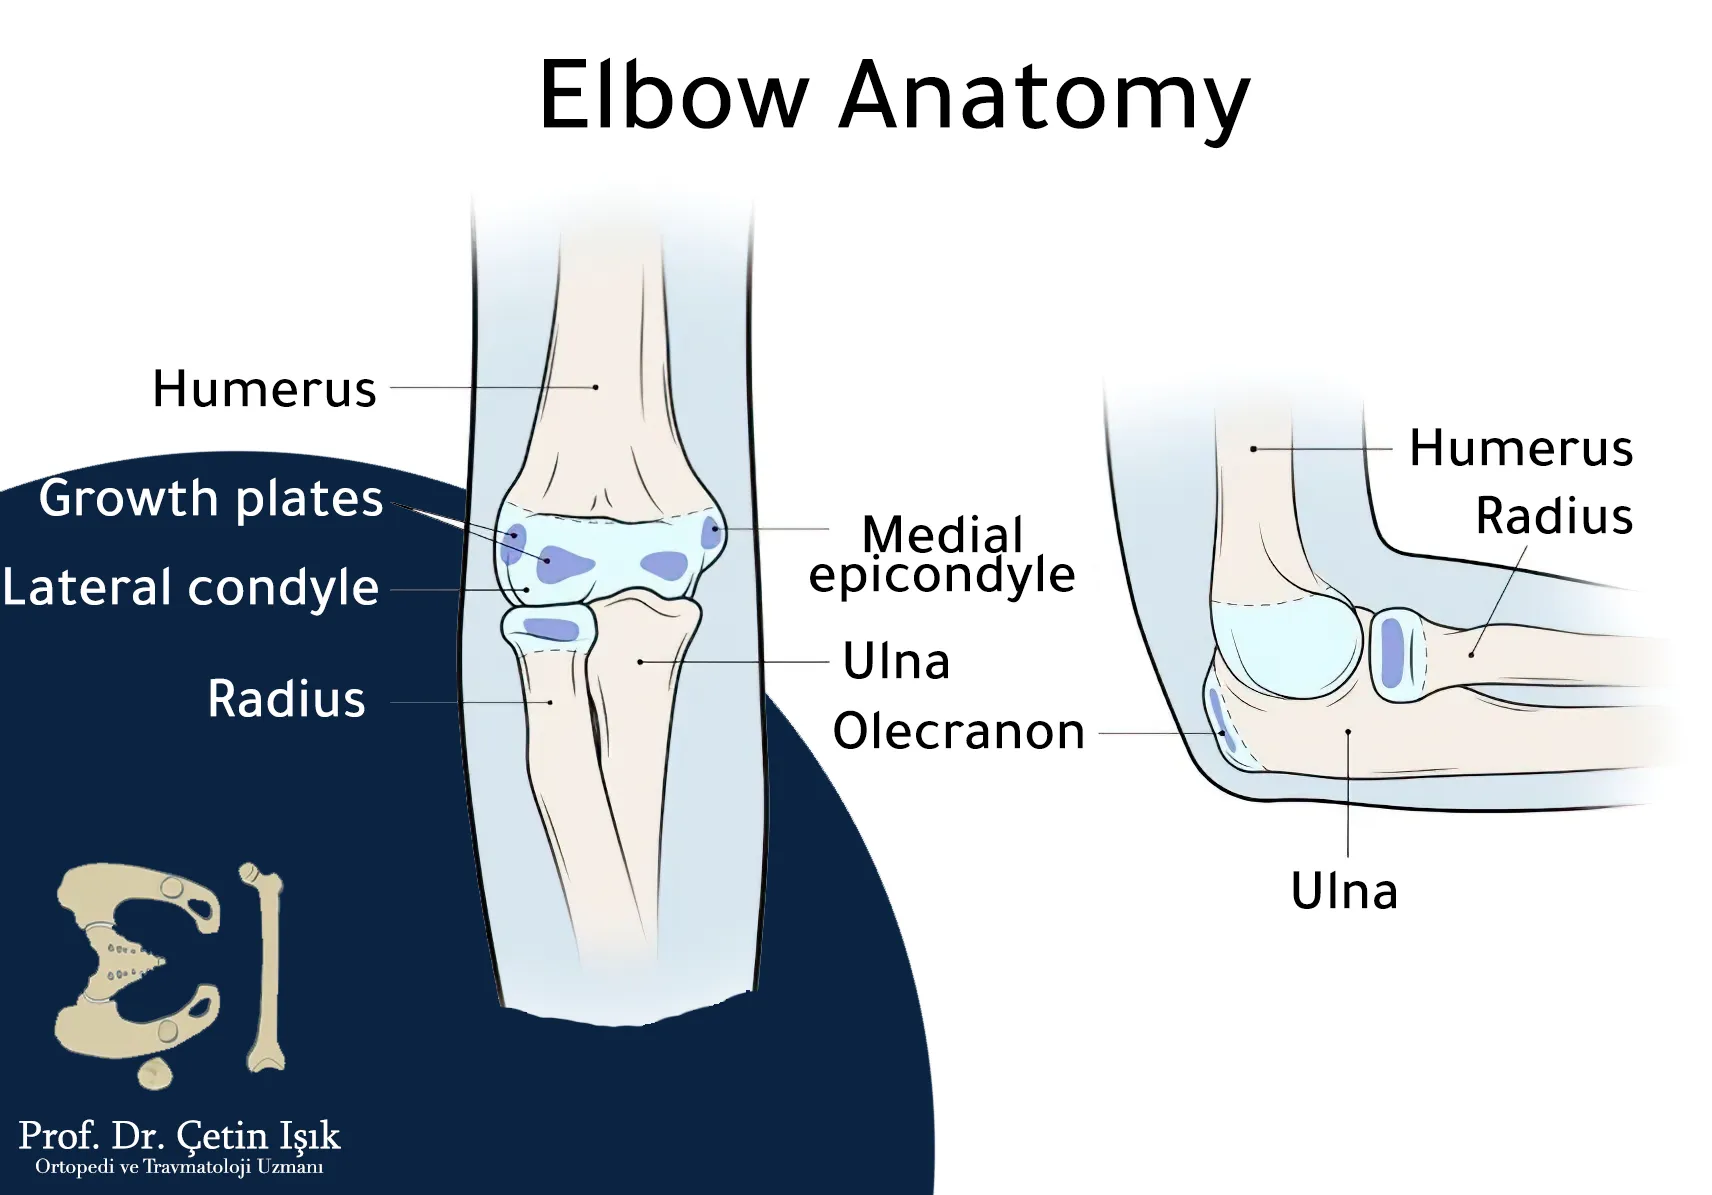 The image shows the components of the elbow joint, including the radius, ulna, and the distal end of the humerus